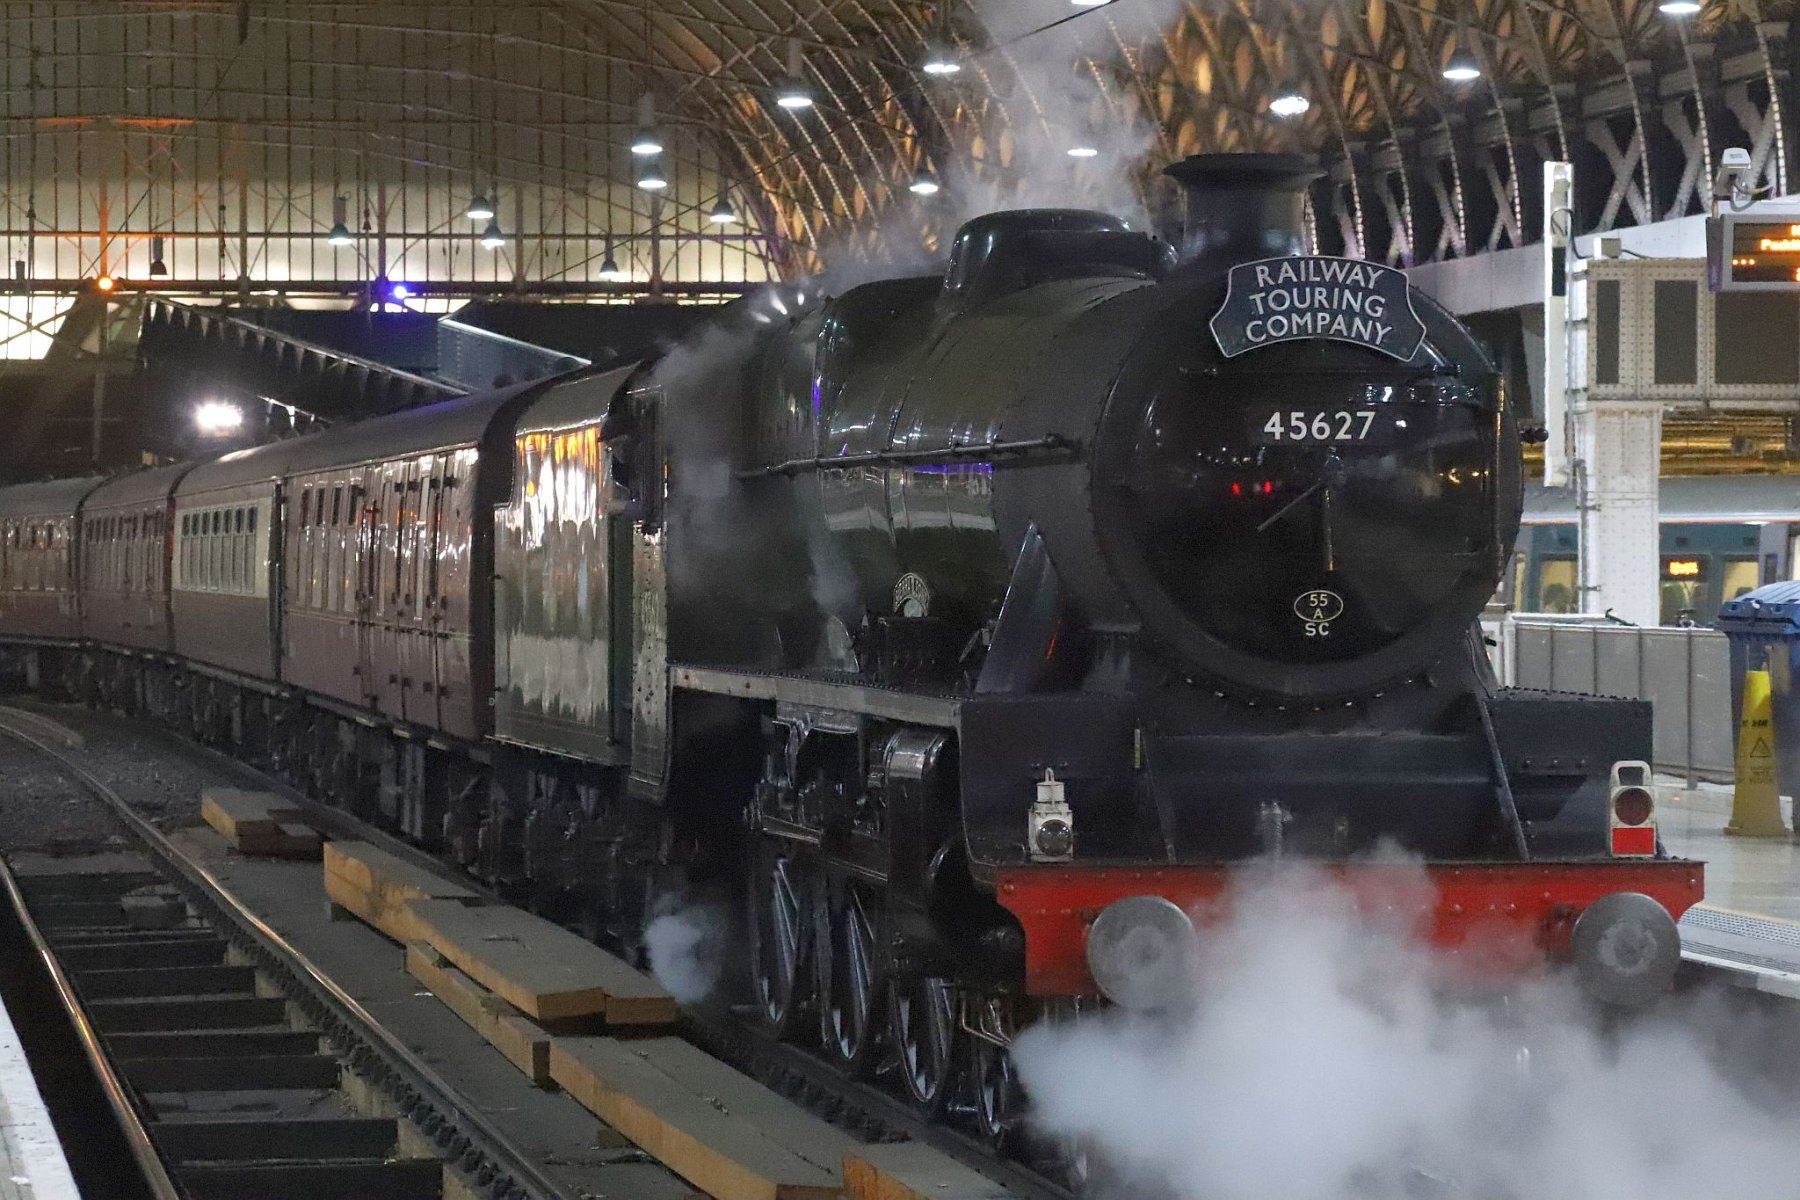 LMS Jubilee Class 5699/45699 Galatea at London Paddington railway station on the evening of 18-Feb-2023 with the Railway Touring Company's special train The Cotswold Venturer. Running as 45627 "Sierra Leone" with 45562 painted on the cab side.